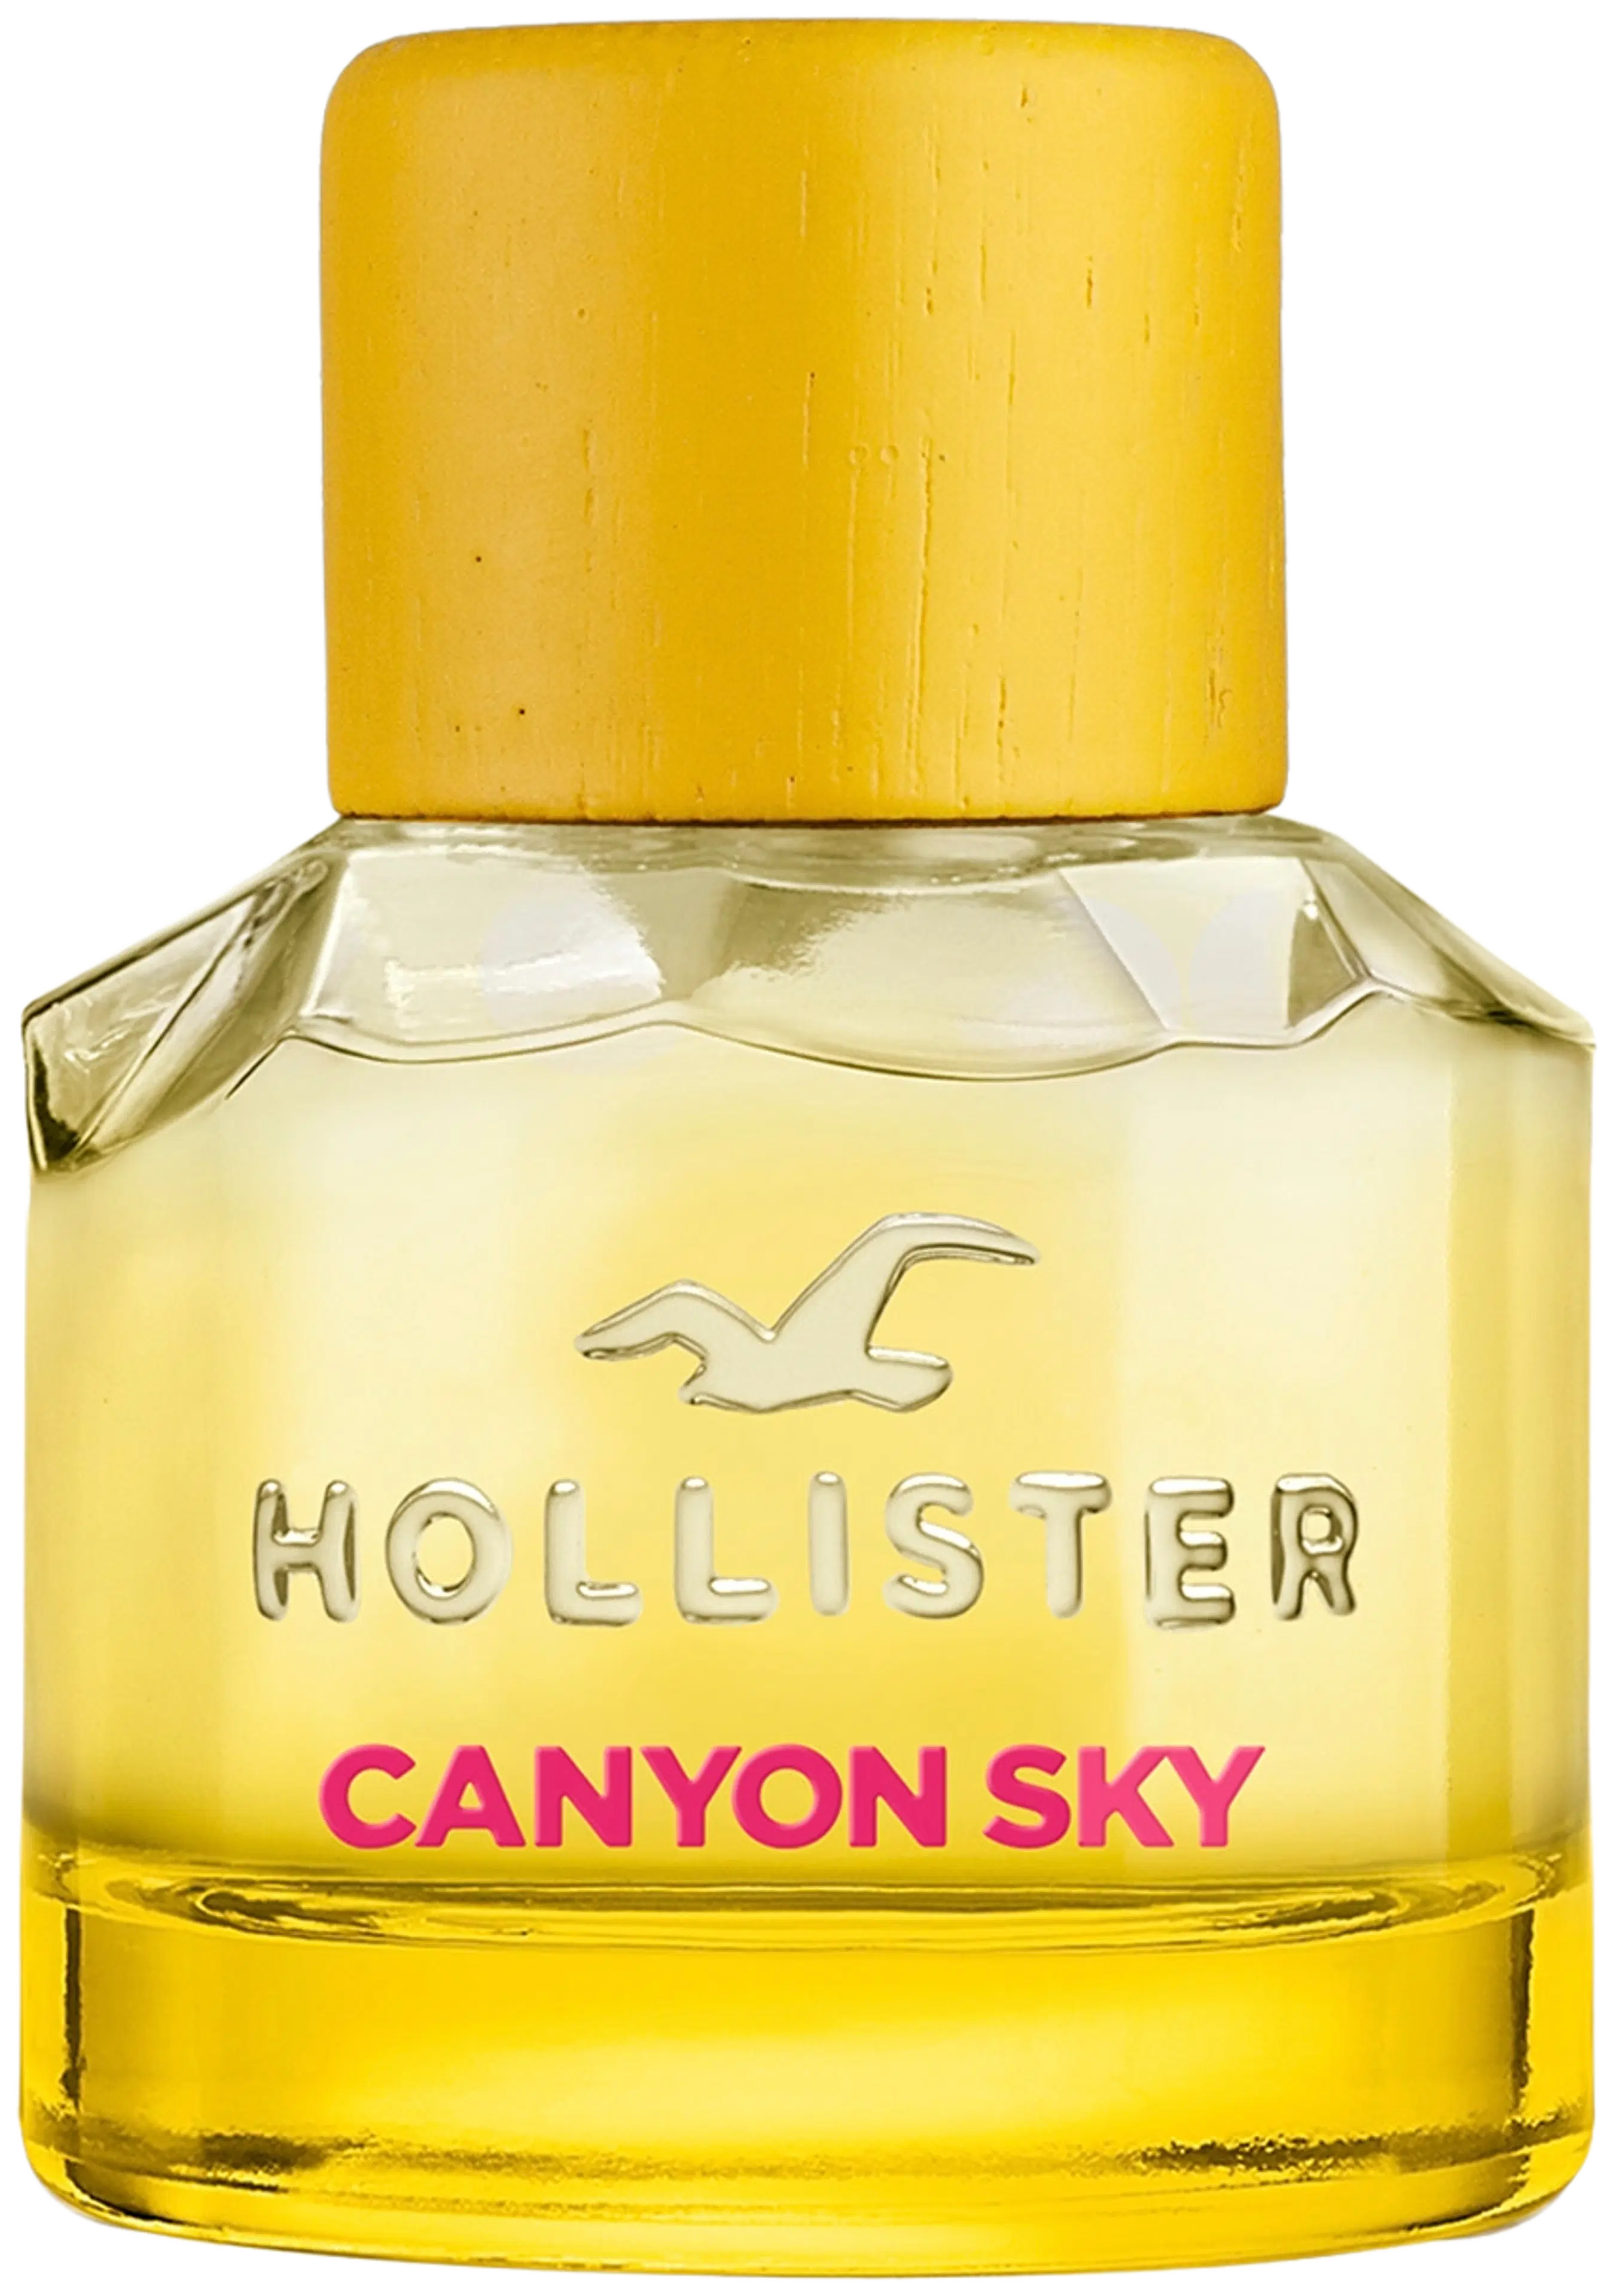 Hollister Canyon Sky for Her EdP 30ml